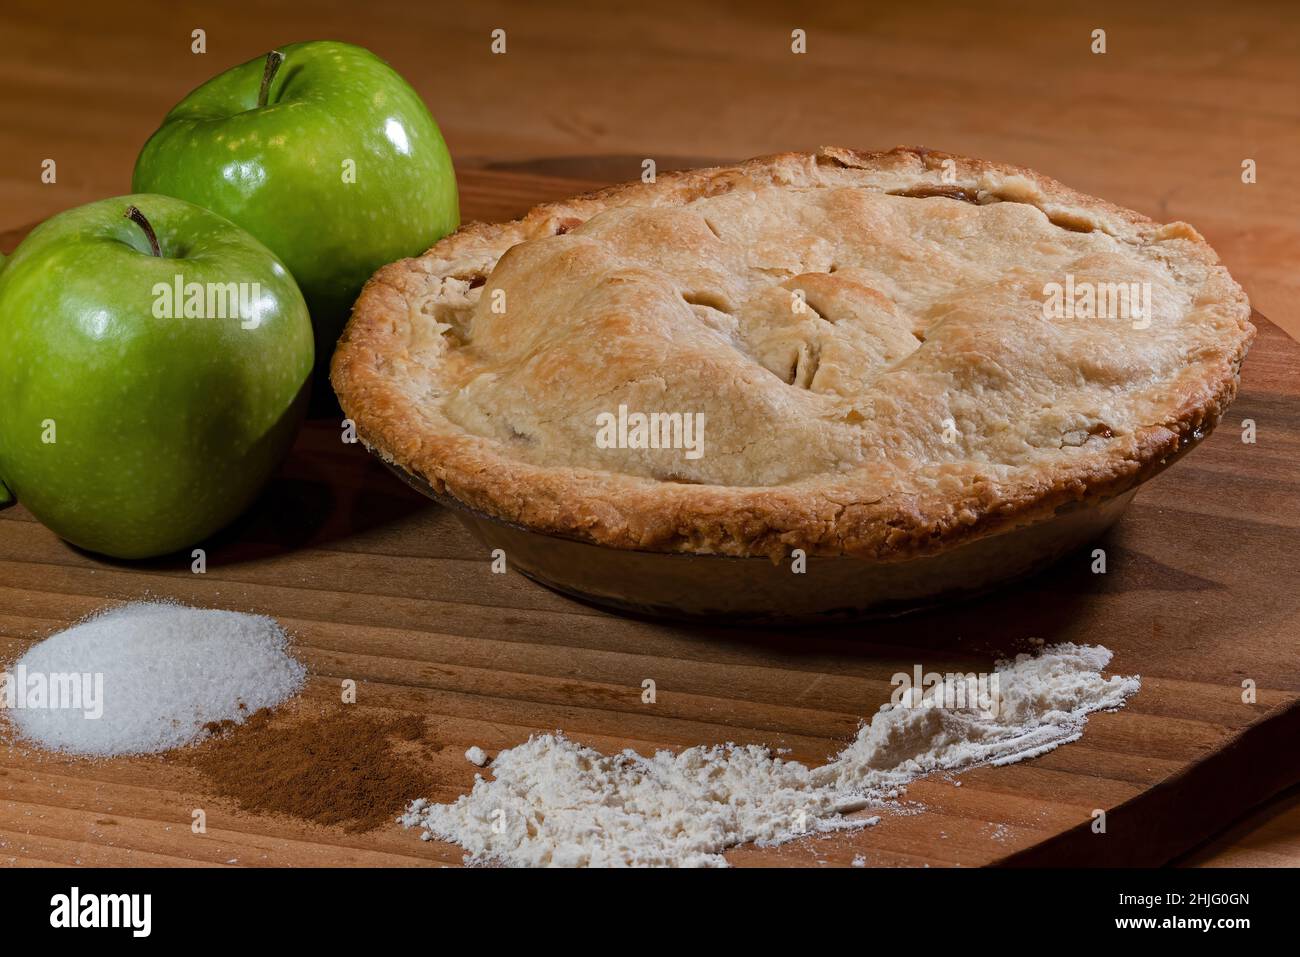 Fresh baked double crust apple pie displayed with key ingredients of green tart apples, sugar, cinnamon, and flour. Stock Photo